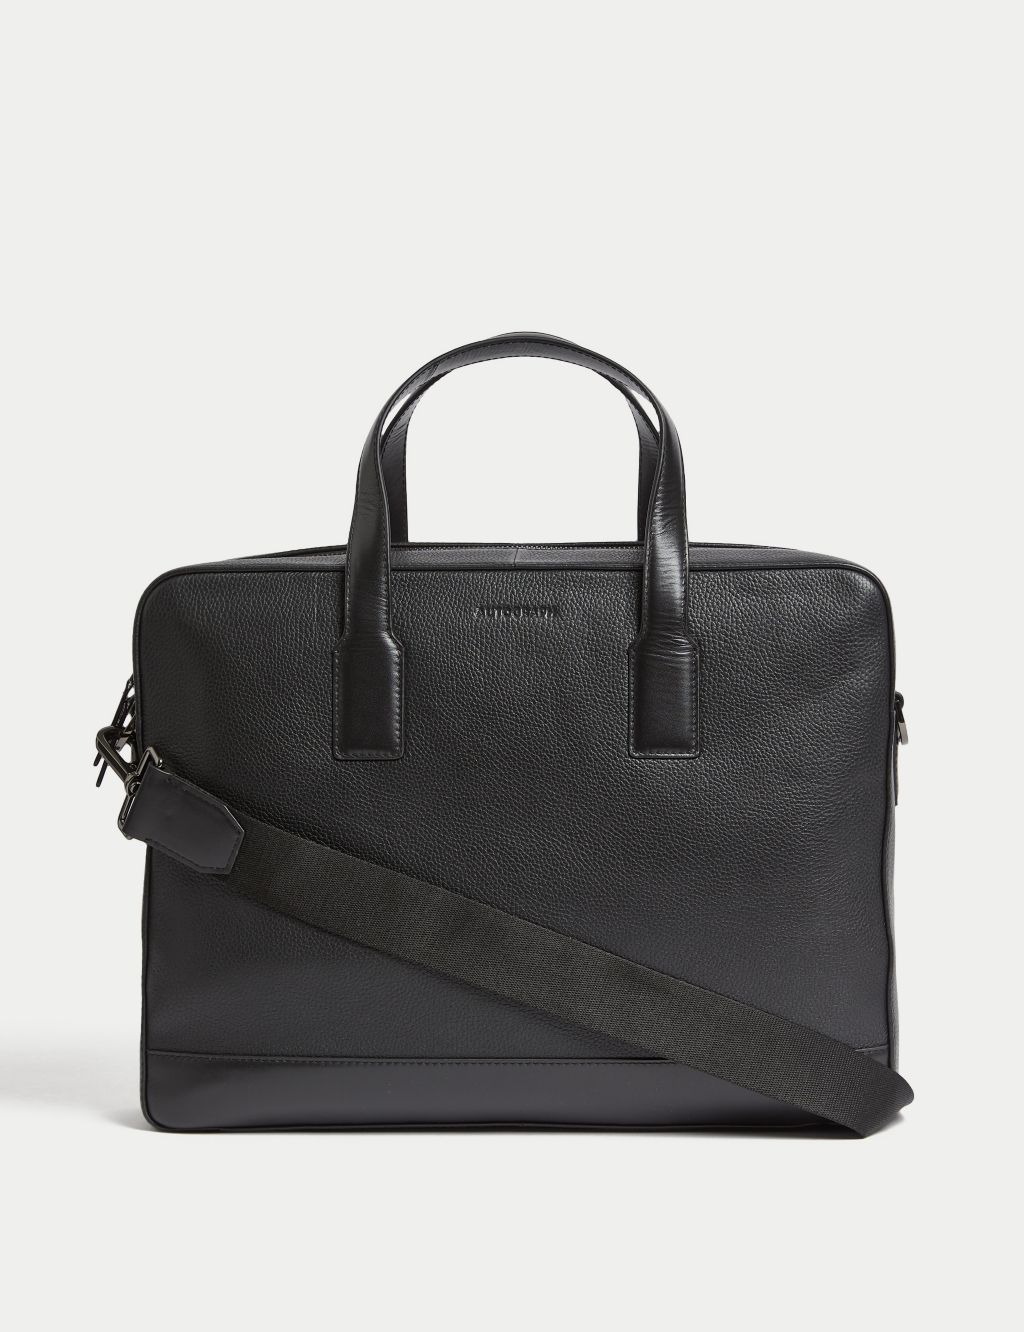 Men’s Leather Bags | M&S